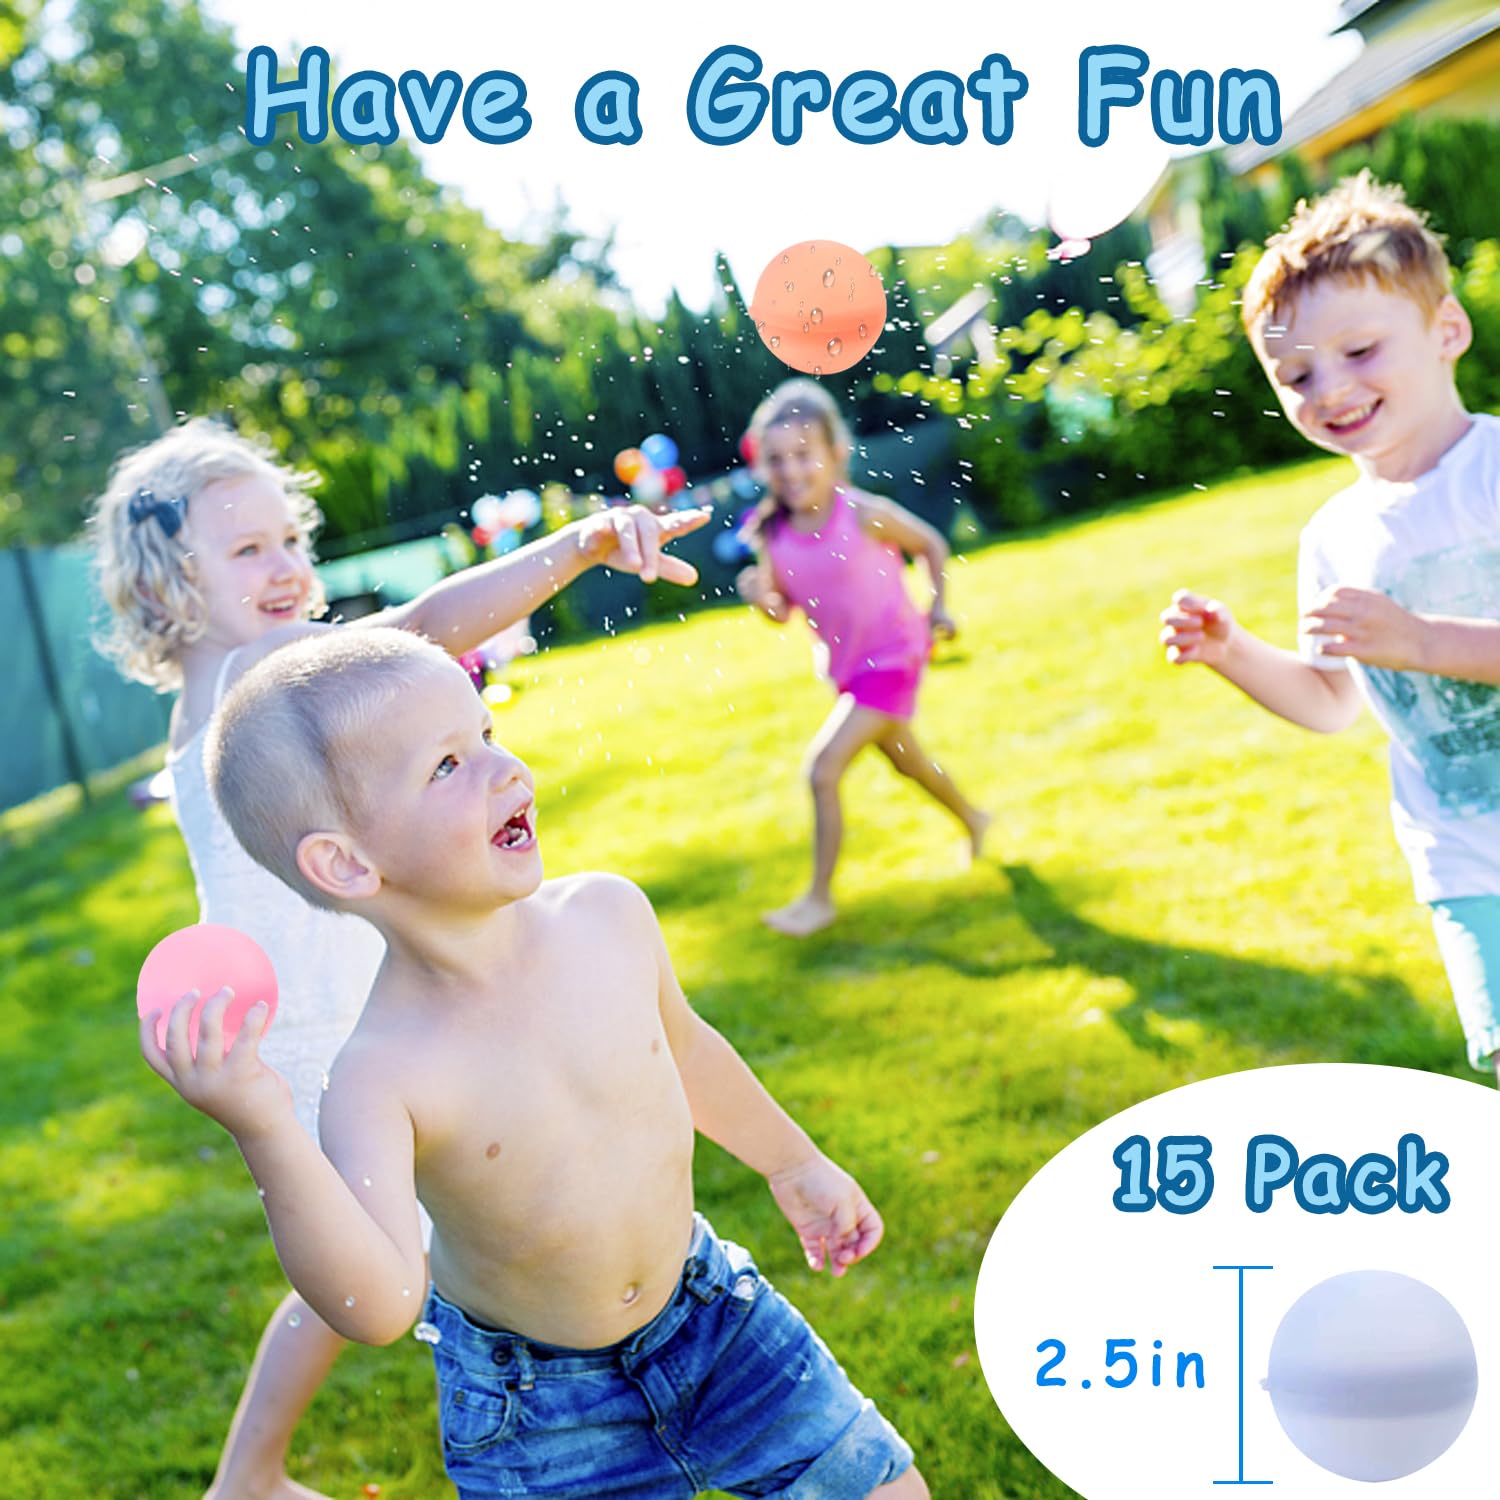 15Pcs Reusable Water Balloons - Latex-Free Soft Silicone Water Bomb Pool Toys, Quick-Fill Water Bomb for Kids & Adults All Ages Summer Fun Outdoor Party Games